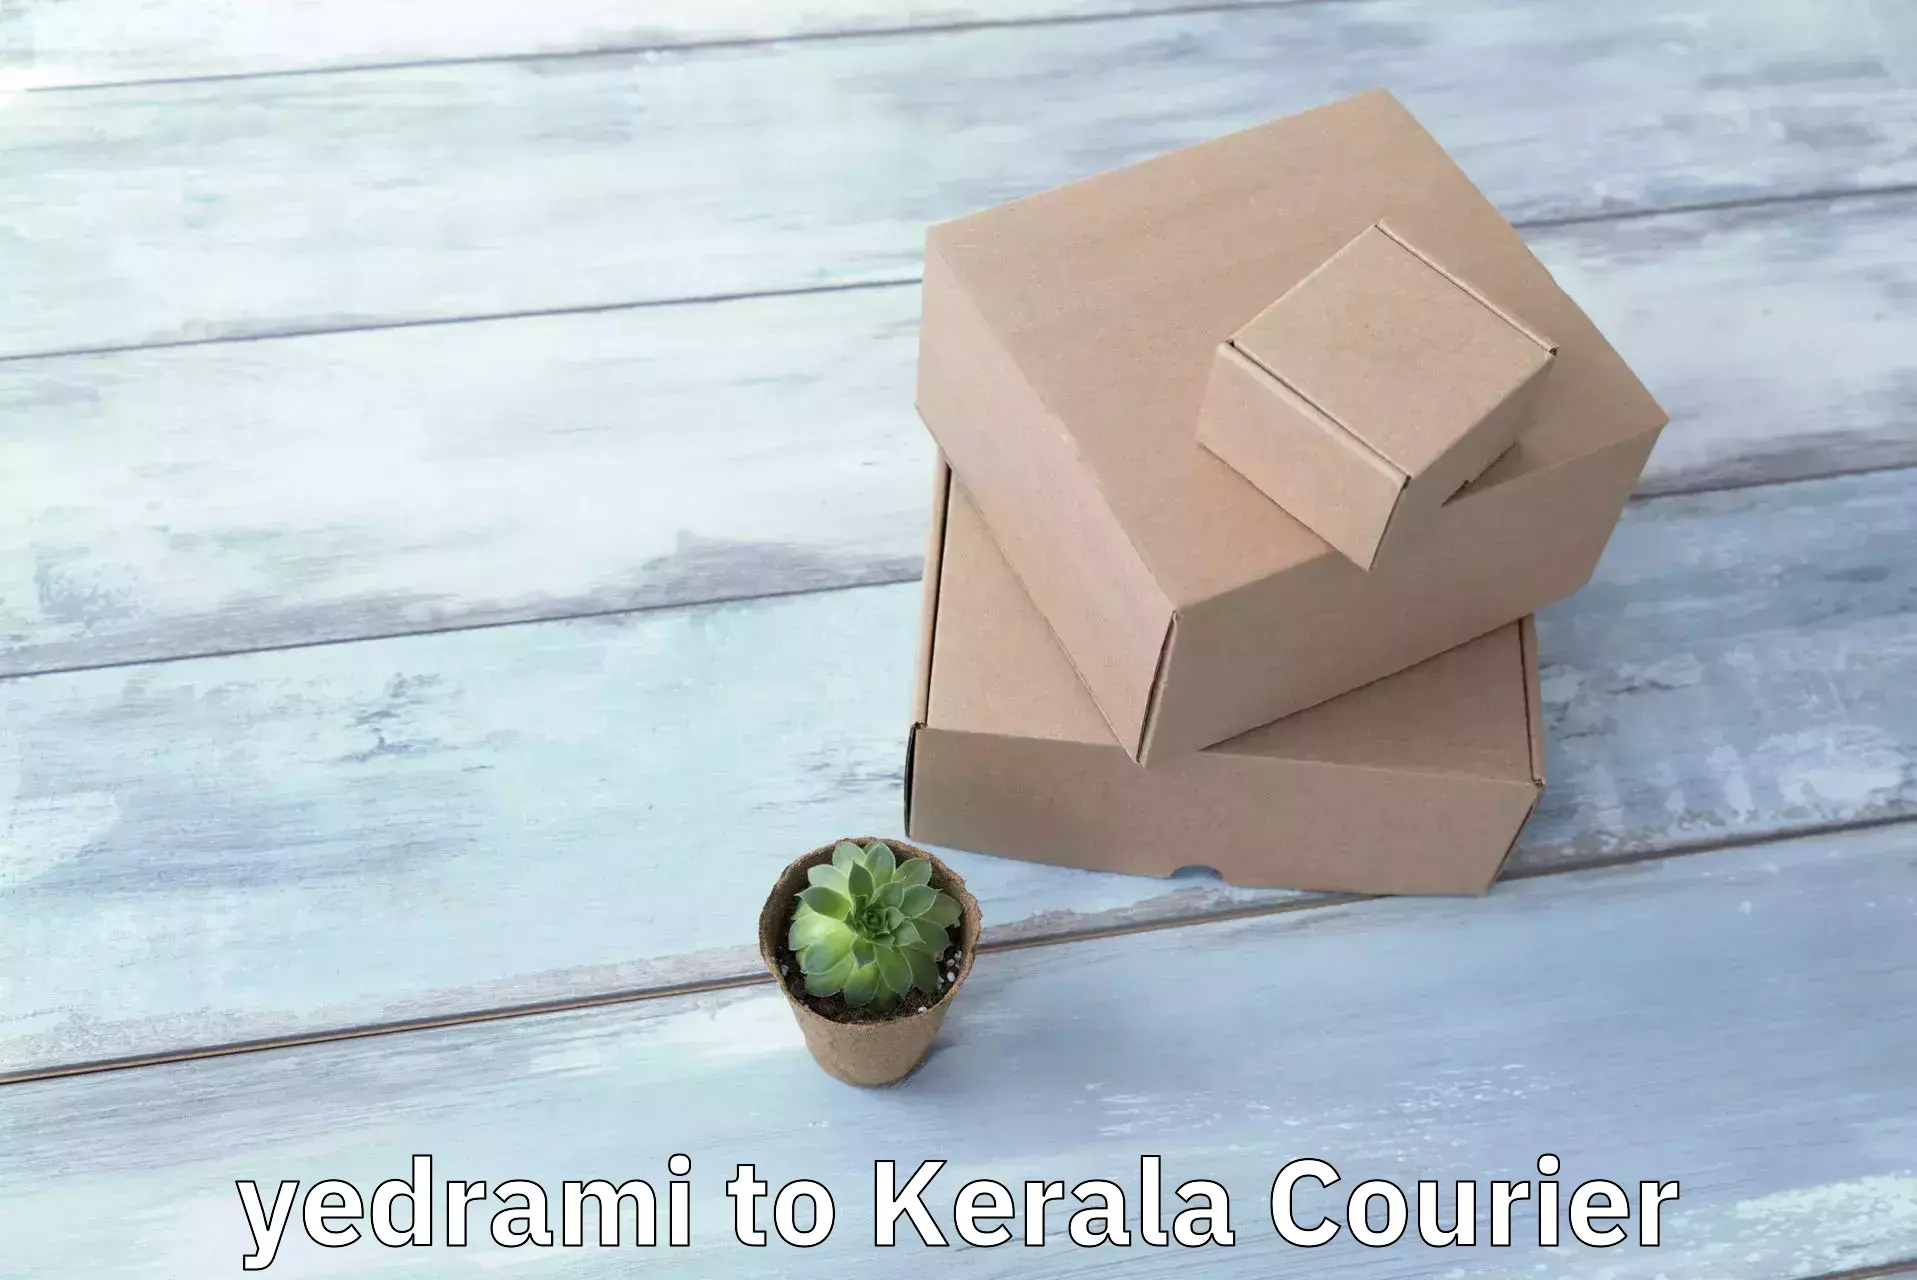 24-hour courier services yedrami to Pala